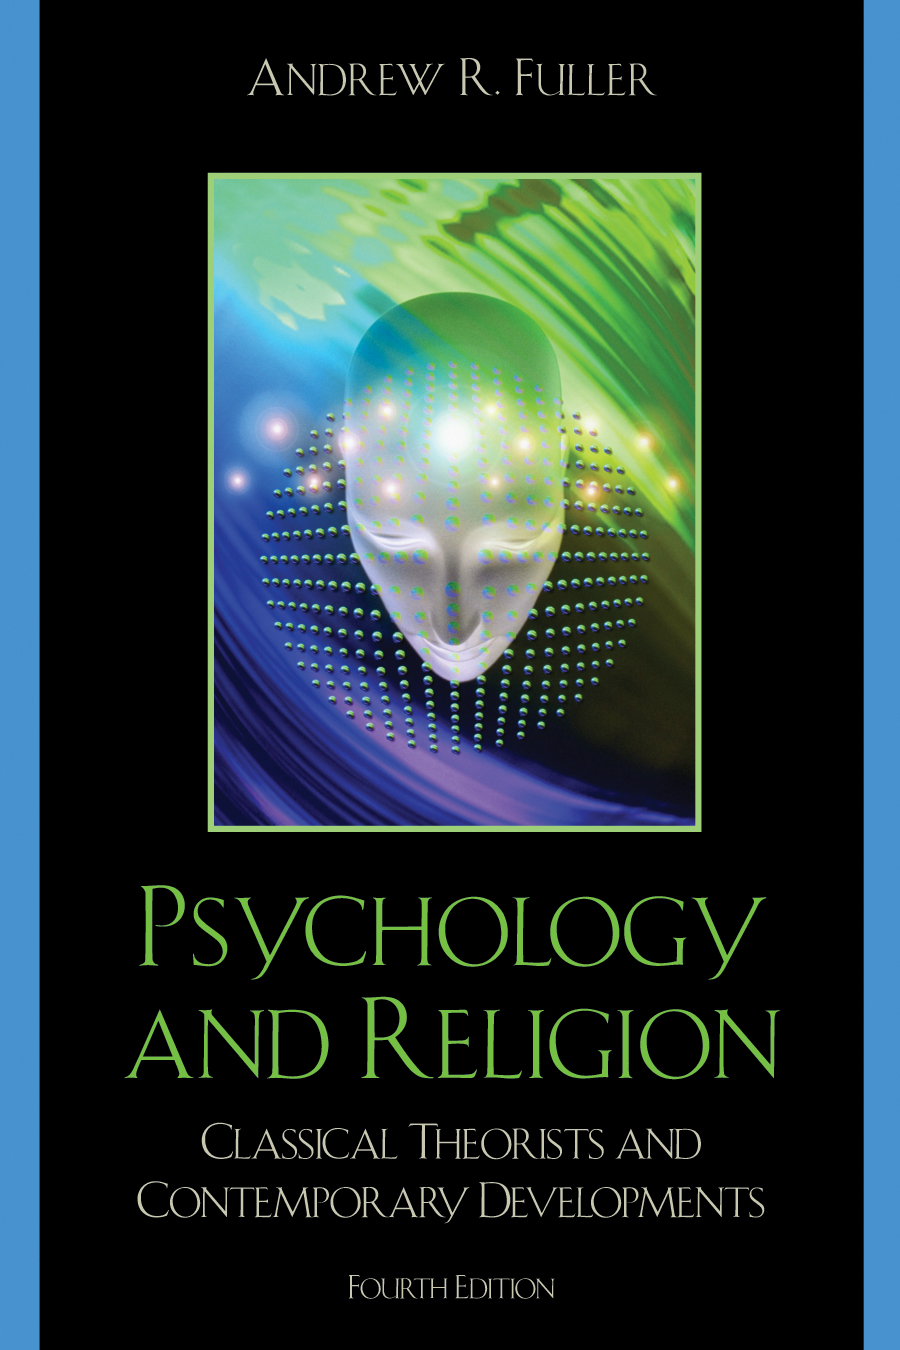 Psychology and Religion: Classical Theorists and Contemporary Developments